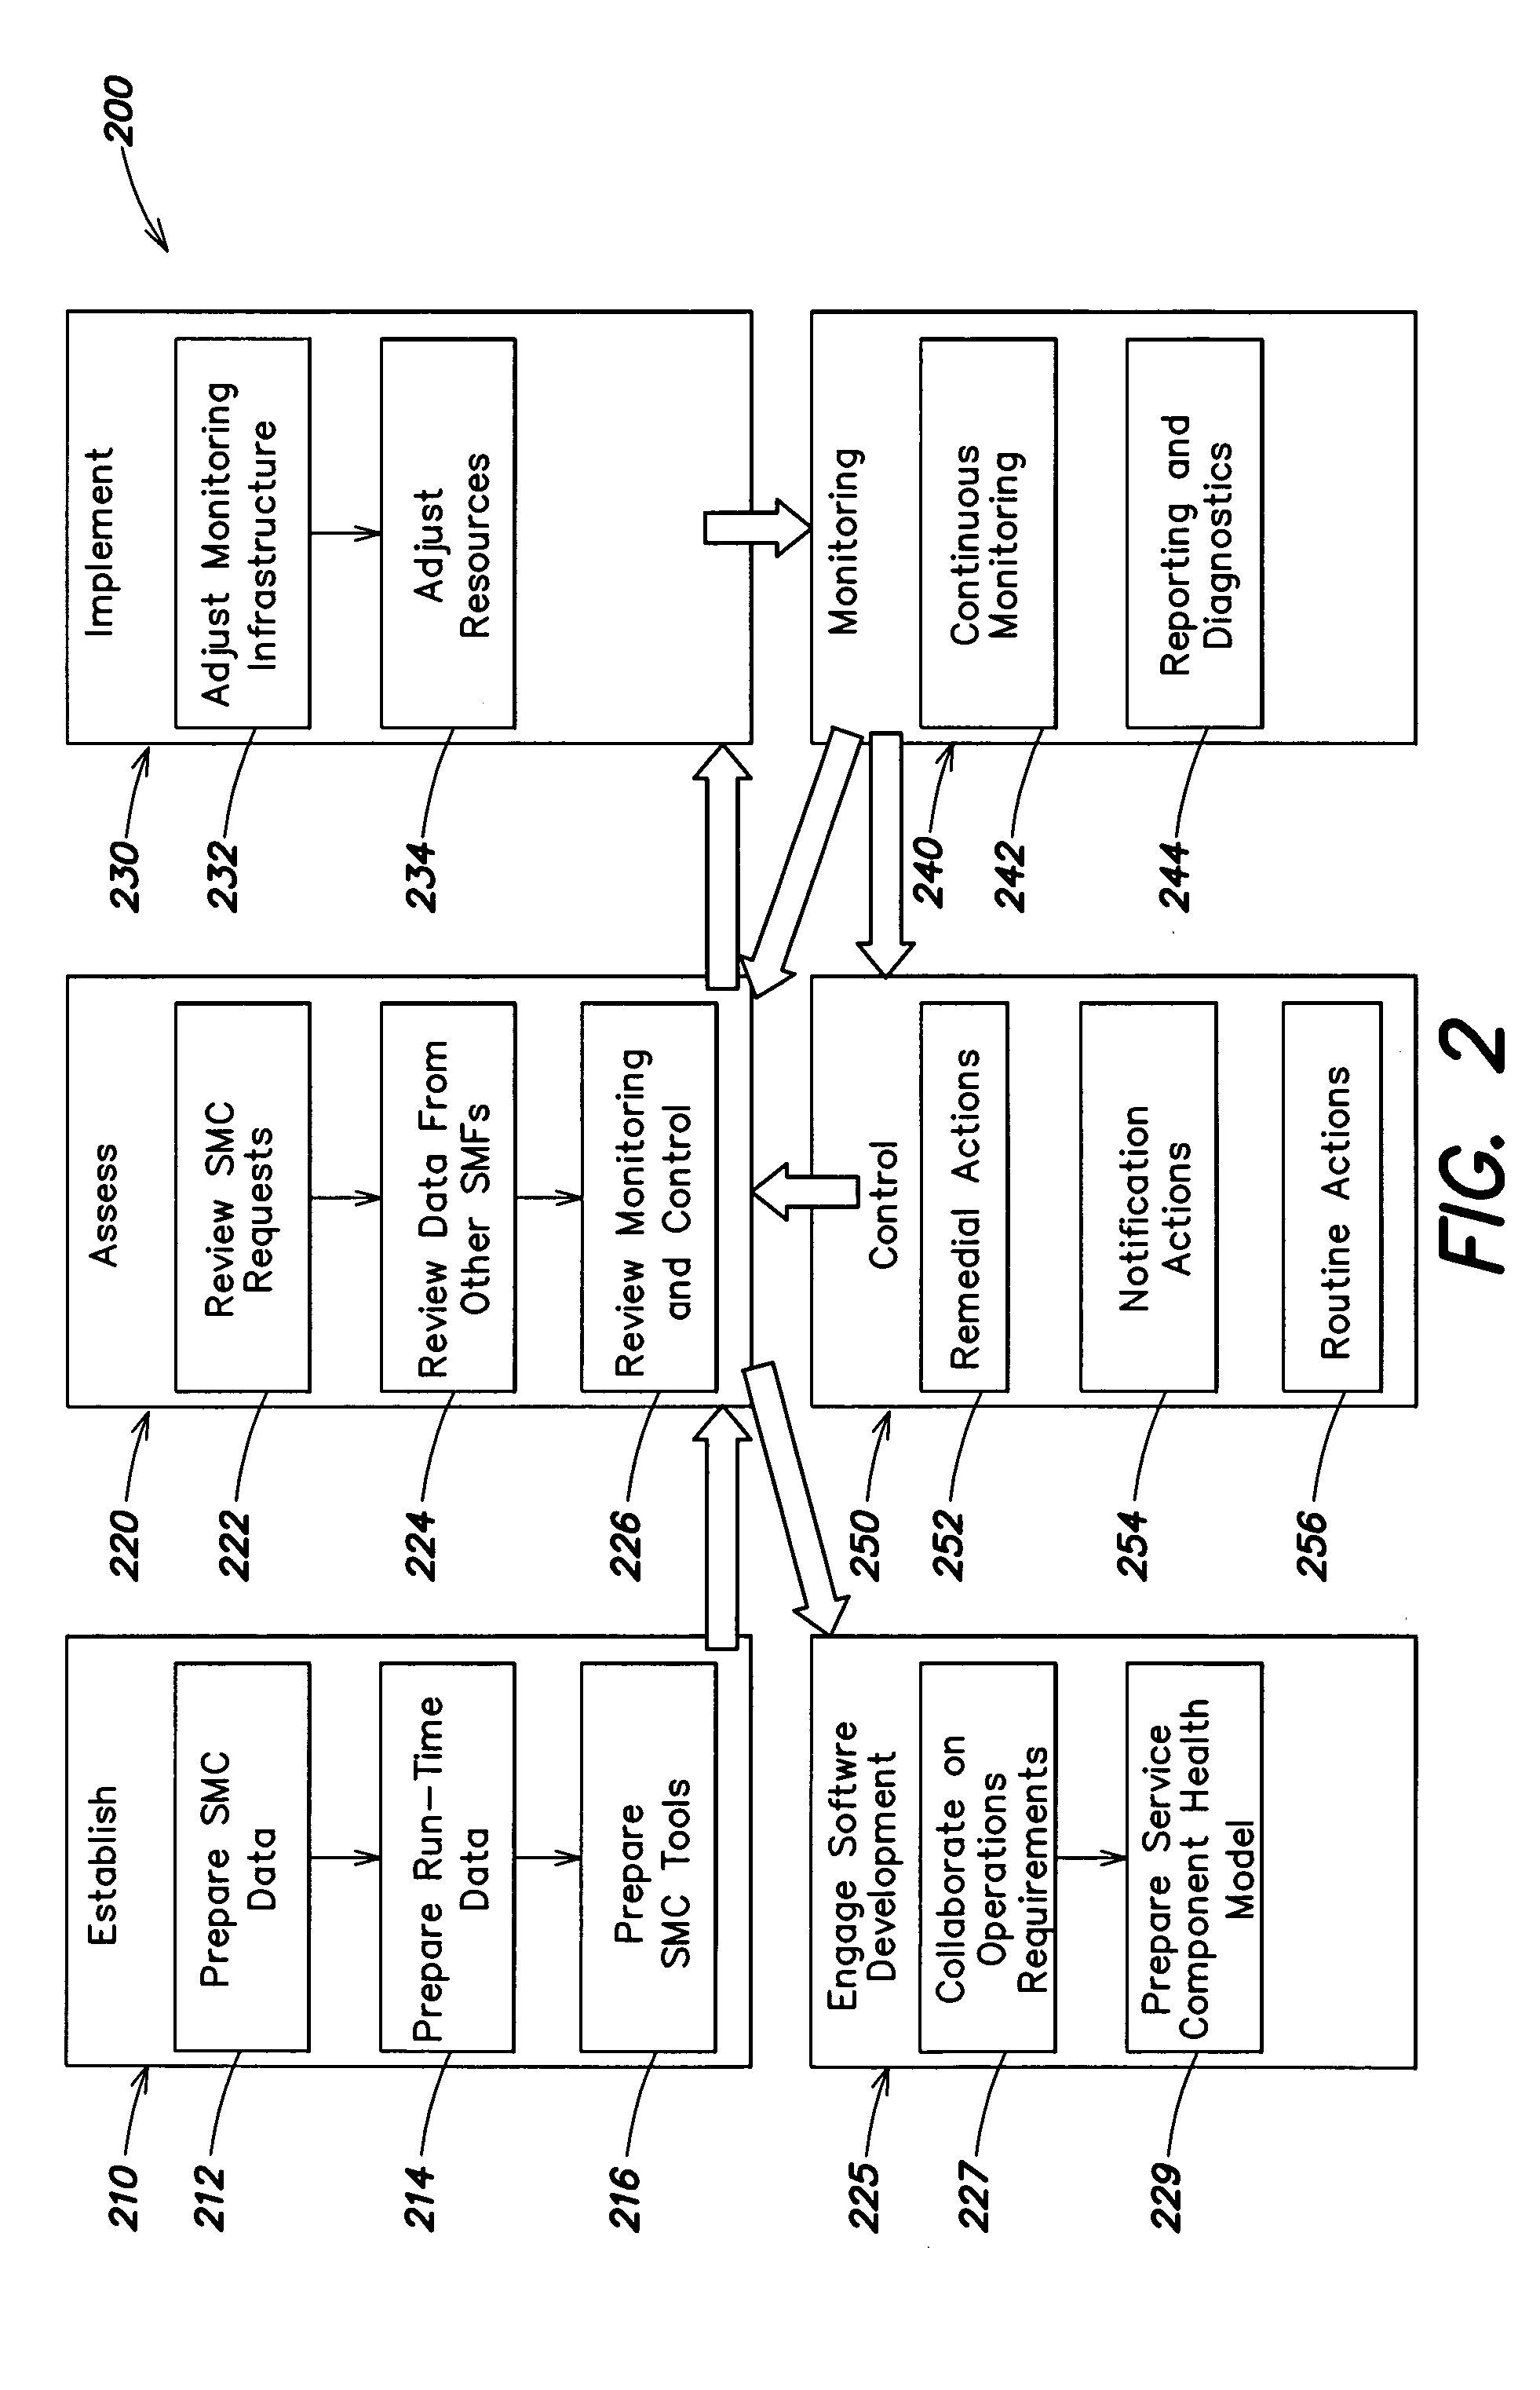 Methods for service monitoring and control